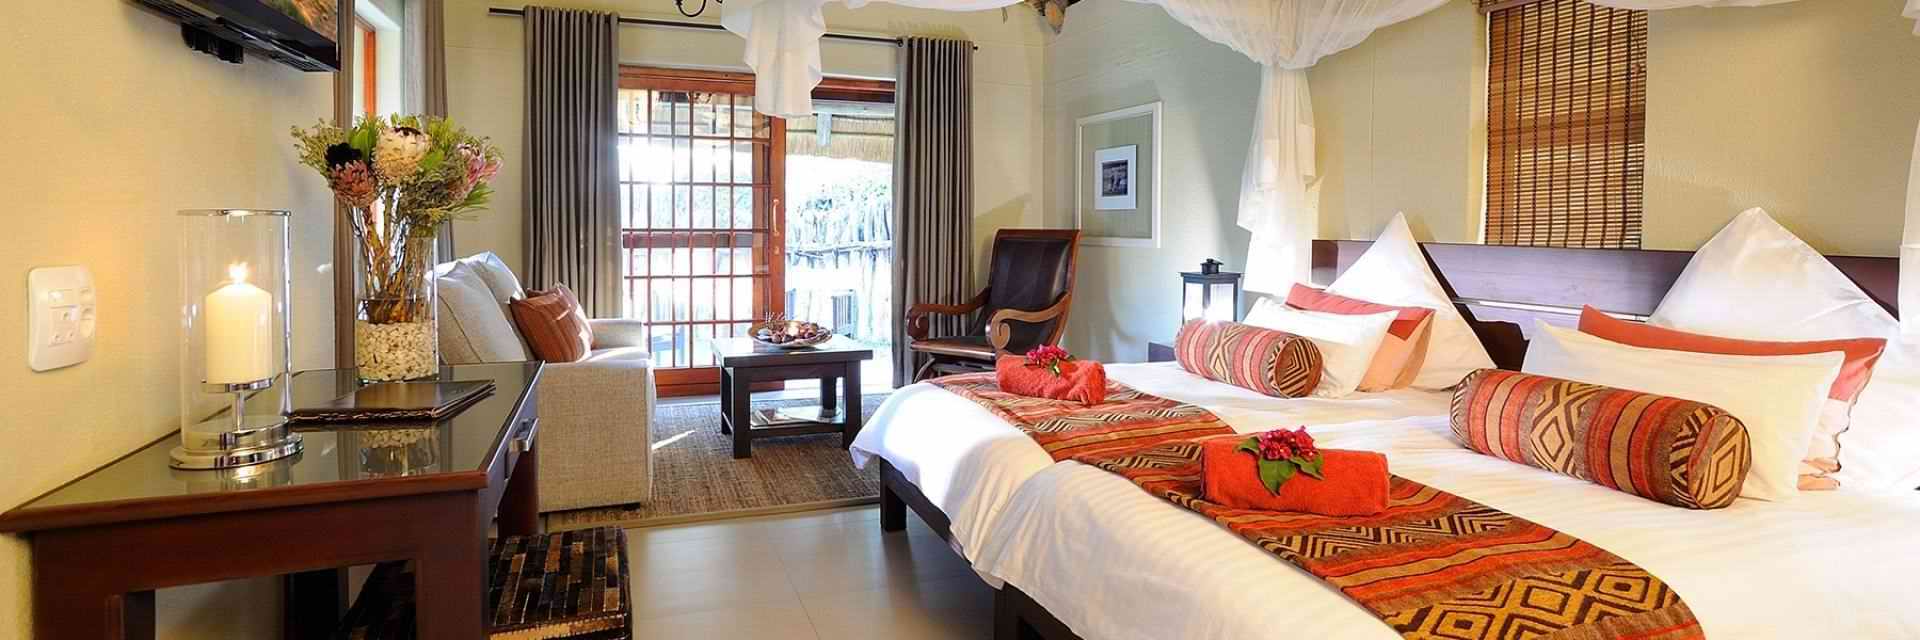 Accommodation at Frans Indong Lodge